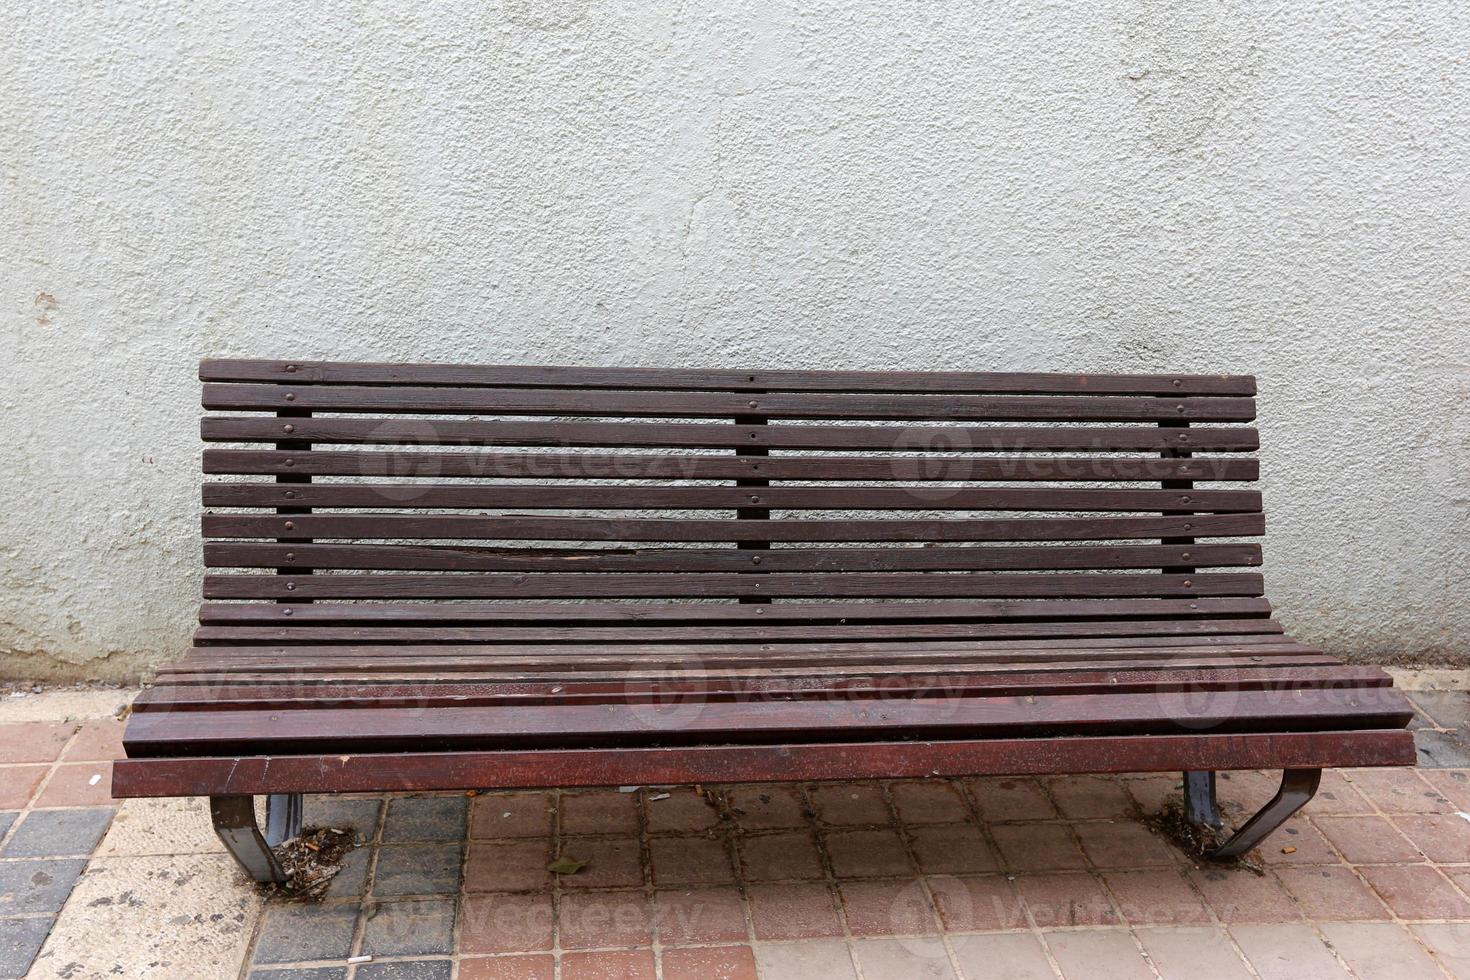 Bench for rest in a city park on the Mediterranean coast in northern Israel photo